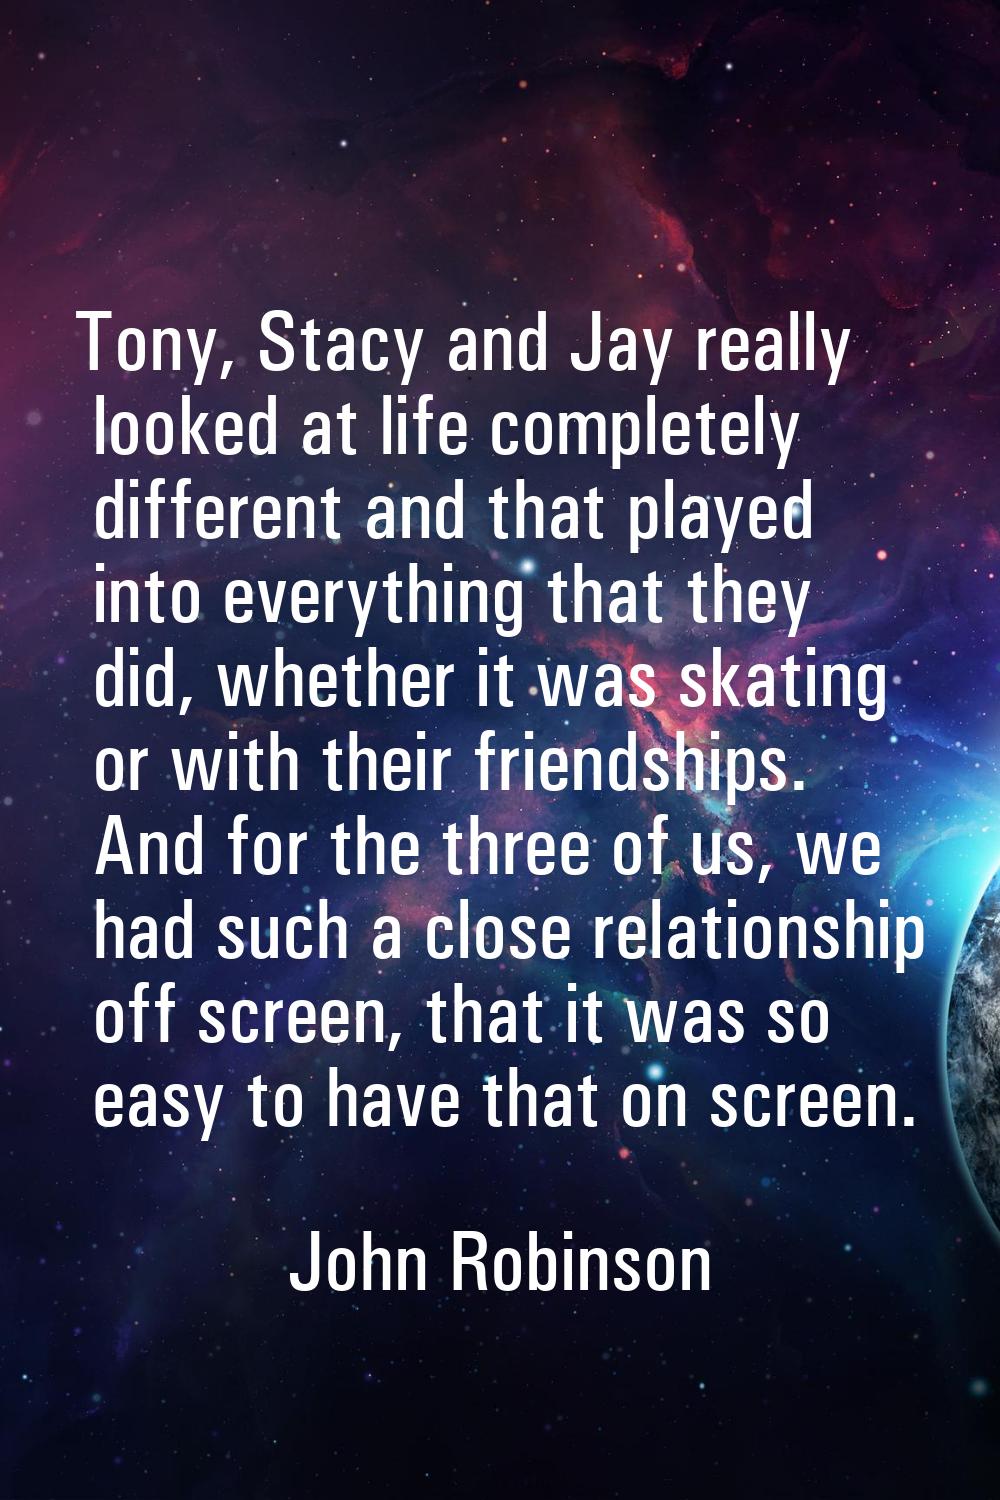 Tony, Stacy and Jay really looked at life completely different and that played into everything that